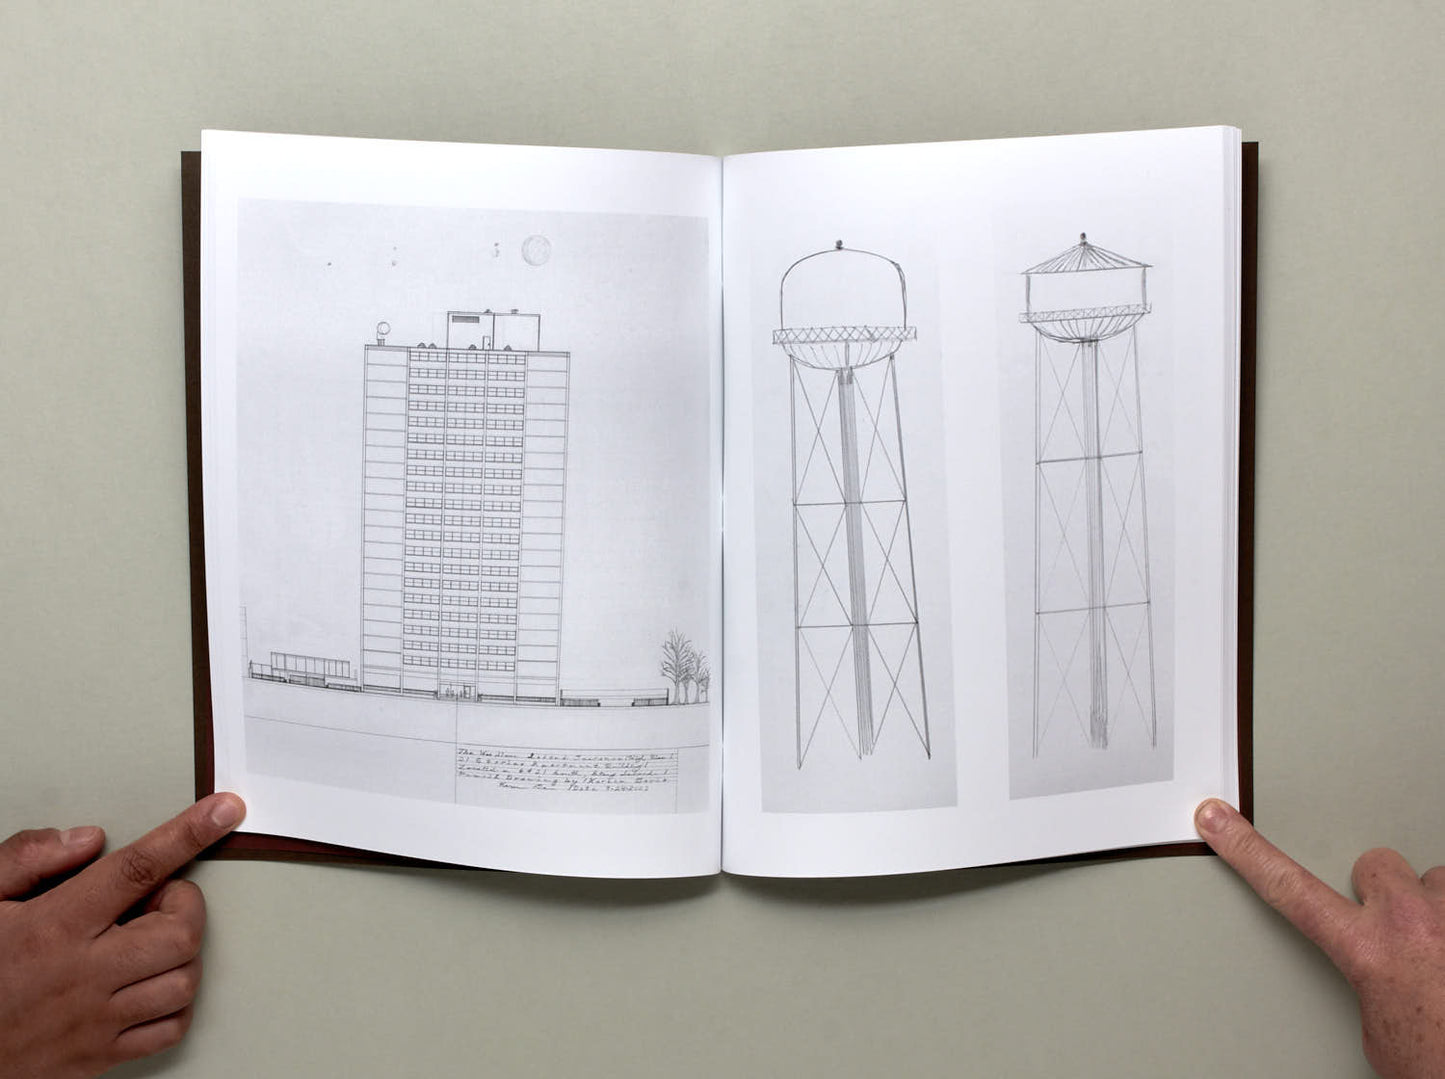 Towers of Steel, Concrete & Glass: Drawings by Kareem Davis and Richard Willis